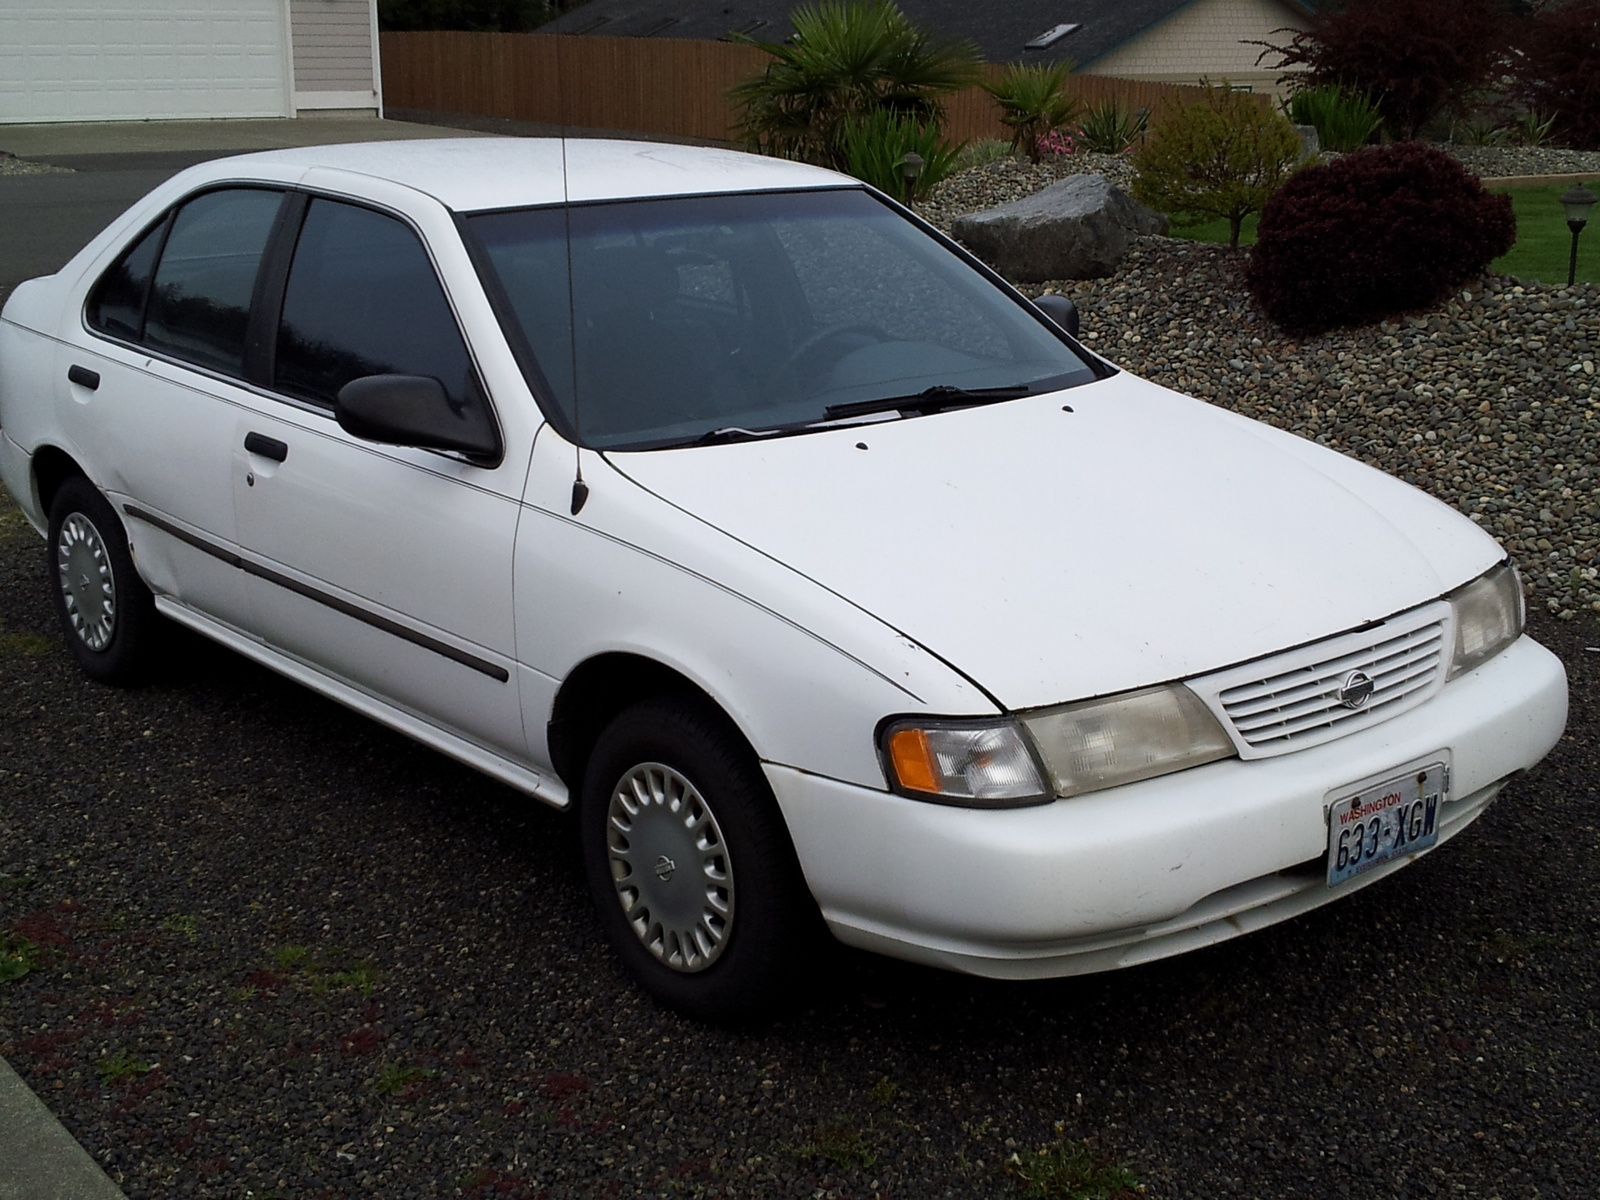 1997 Nissan sentra gxe consumer review #5